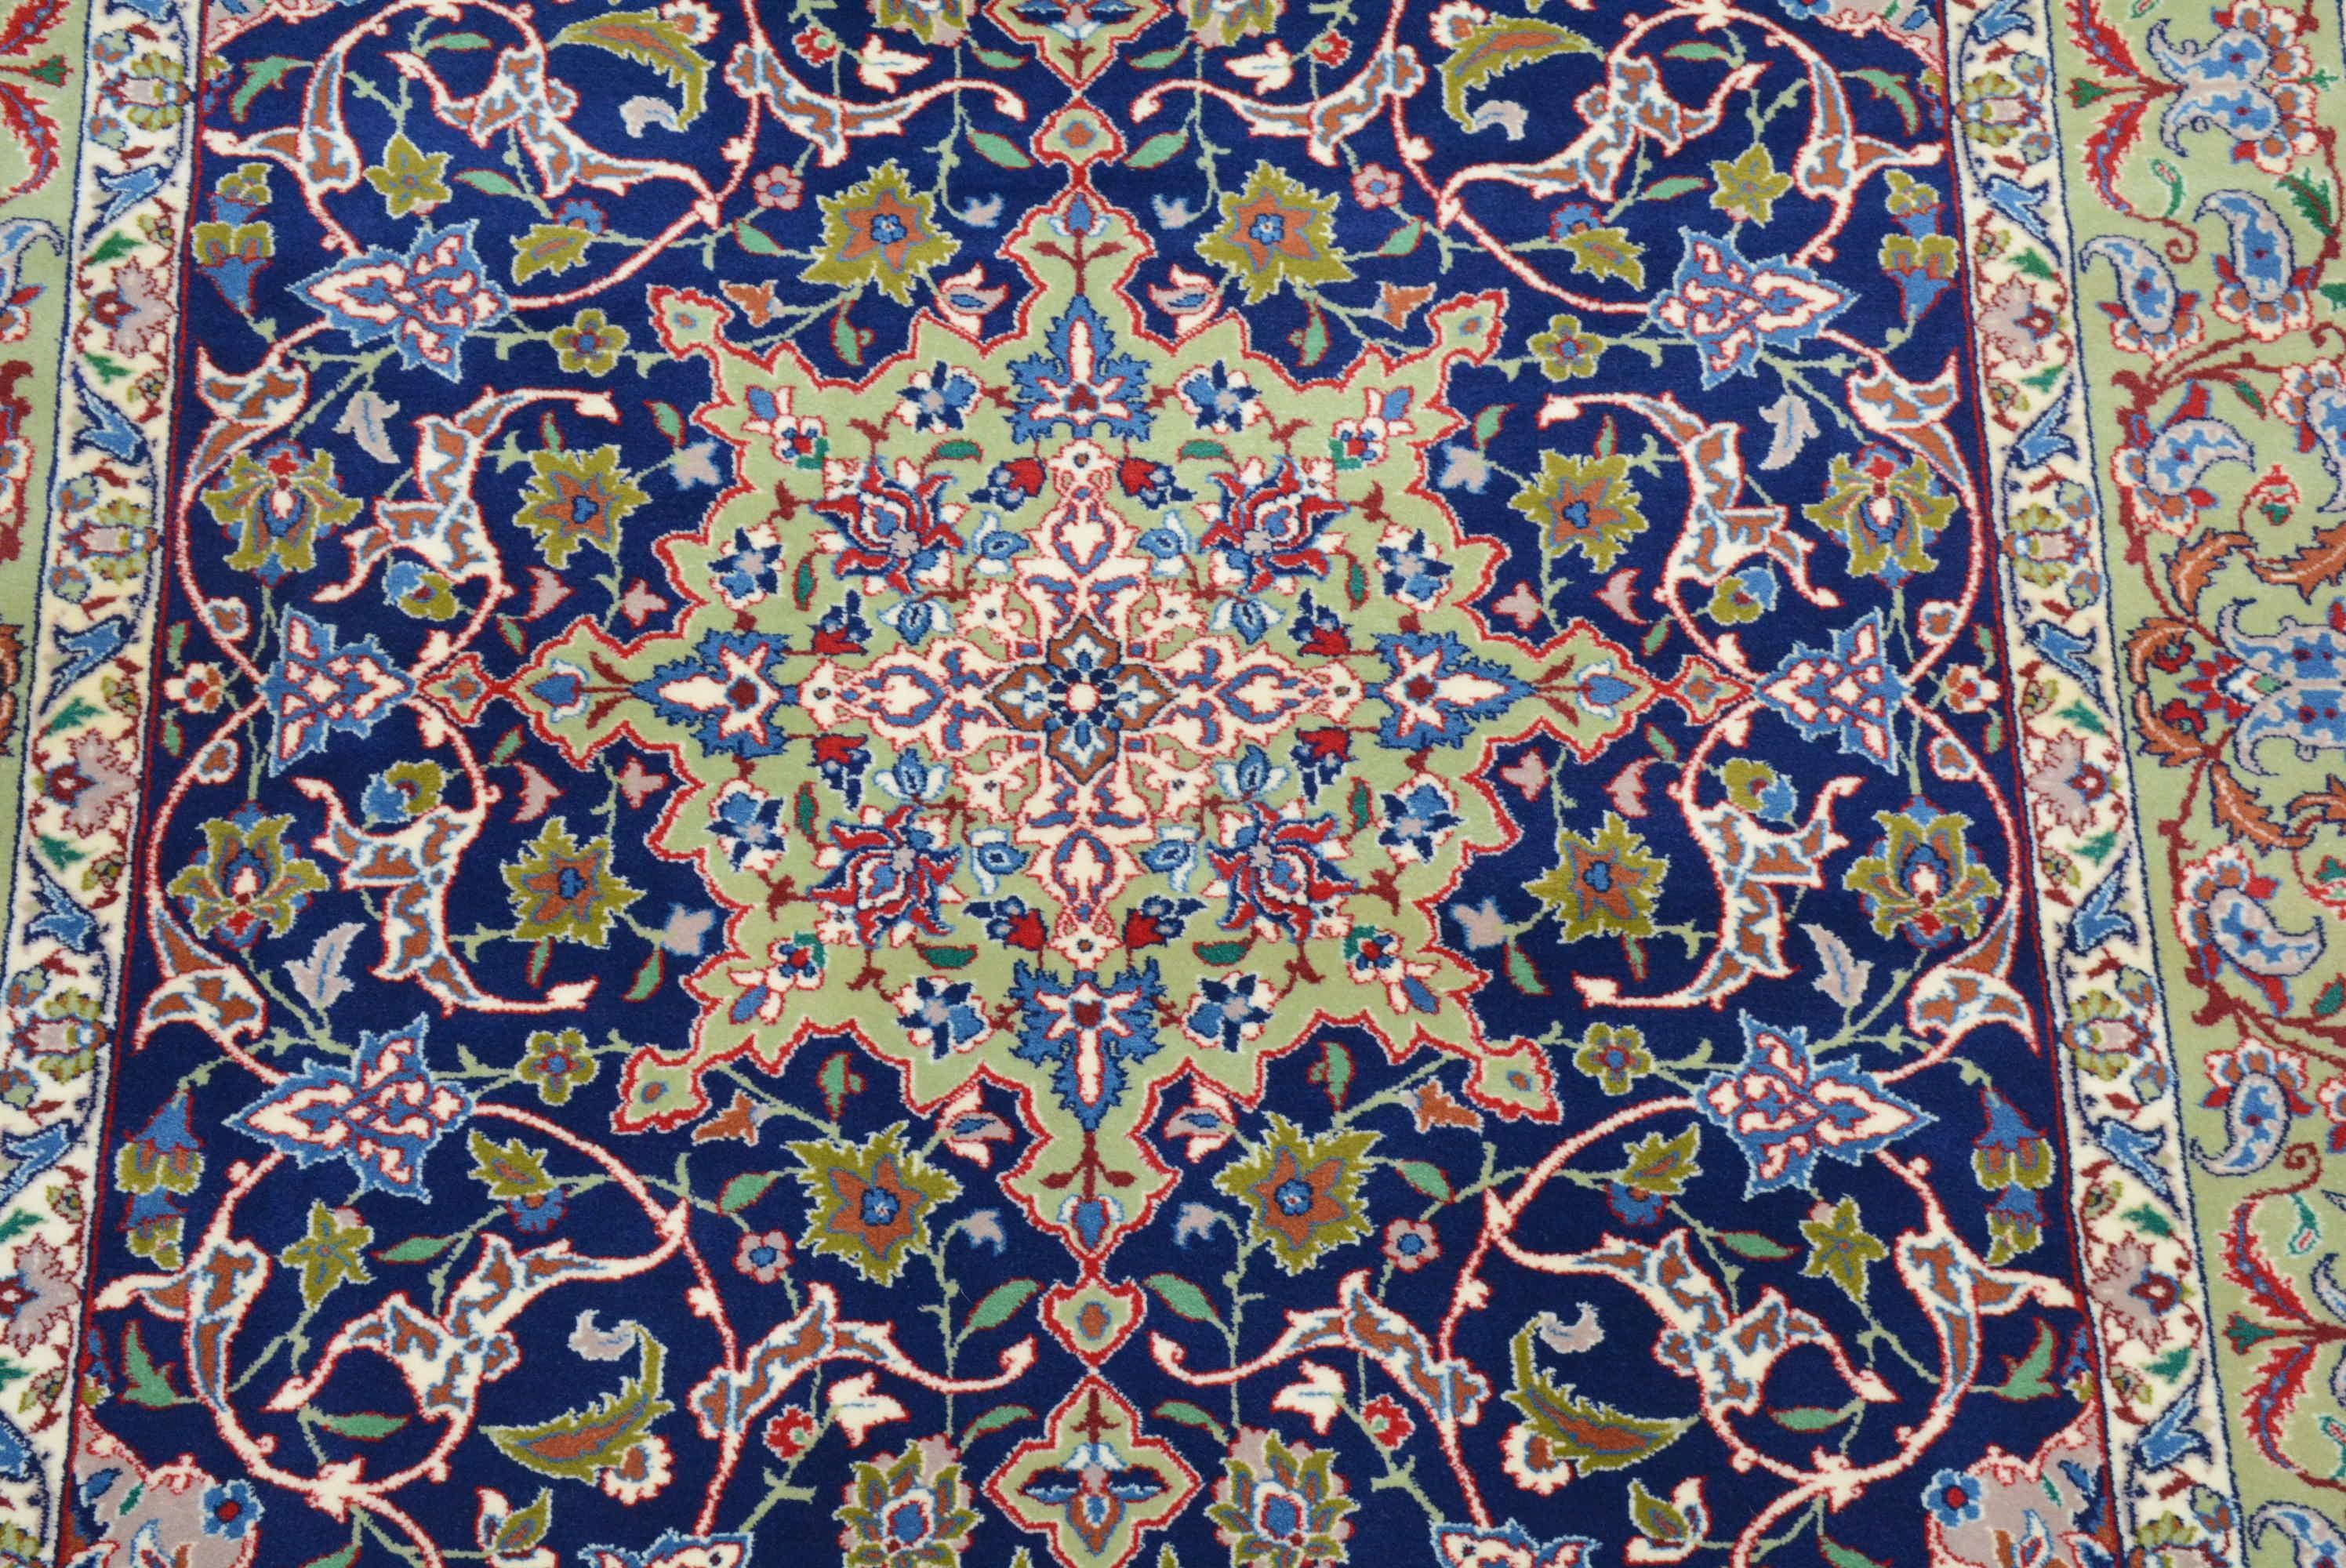 Designs found in contemporary rugs from Isfahan in central Iran are based on those seen during the Safavid period (1501 - 1736 AD).  The most popular pattern has a central circular medallion on an elegantly sculpted field filled with swirling floral